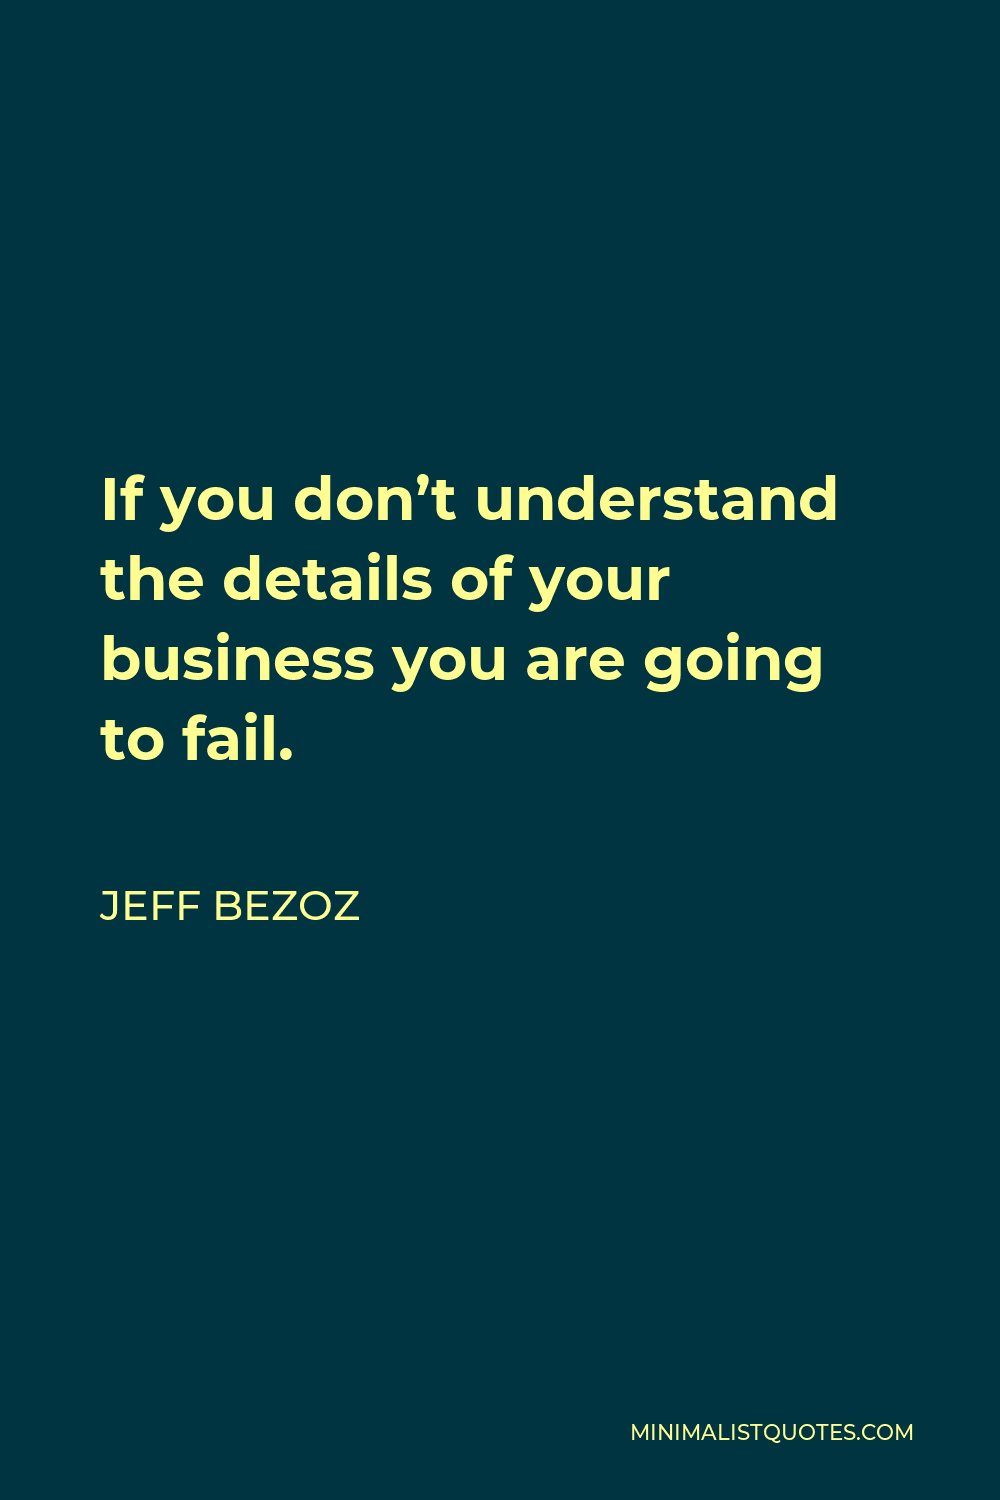 Jeff Bezoz Quote - If you don’t understand the details of your business you are going to fail.